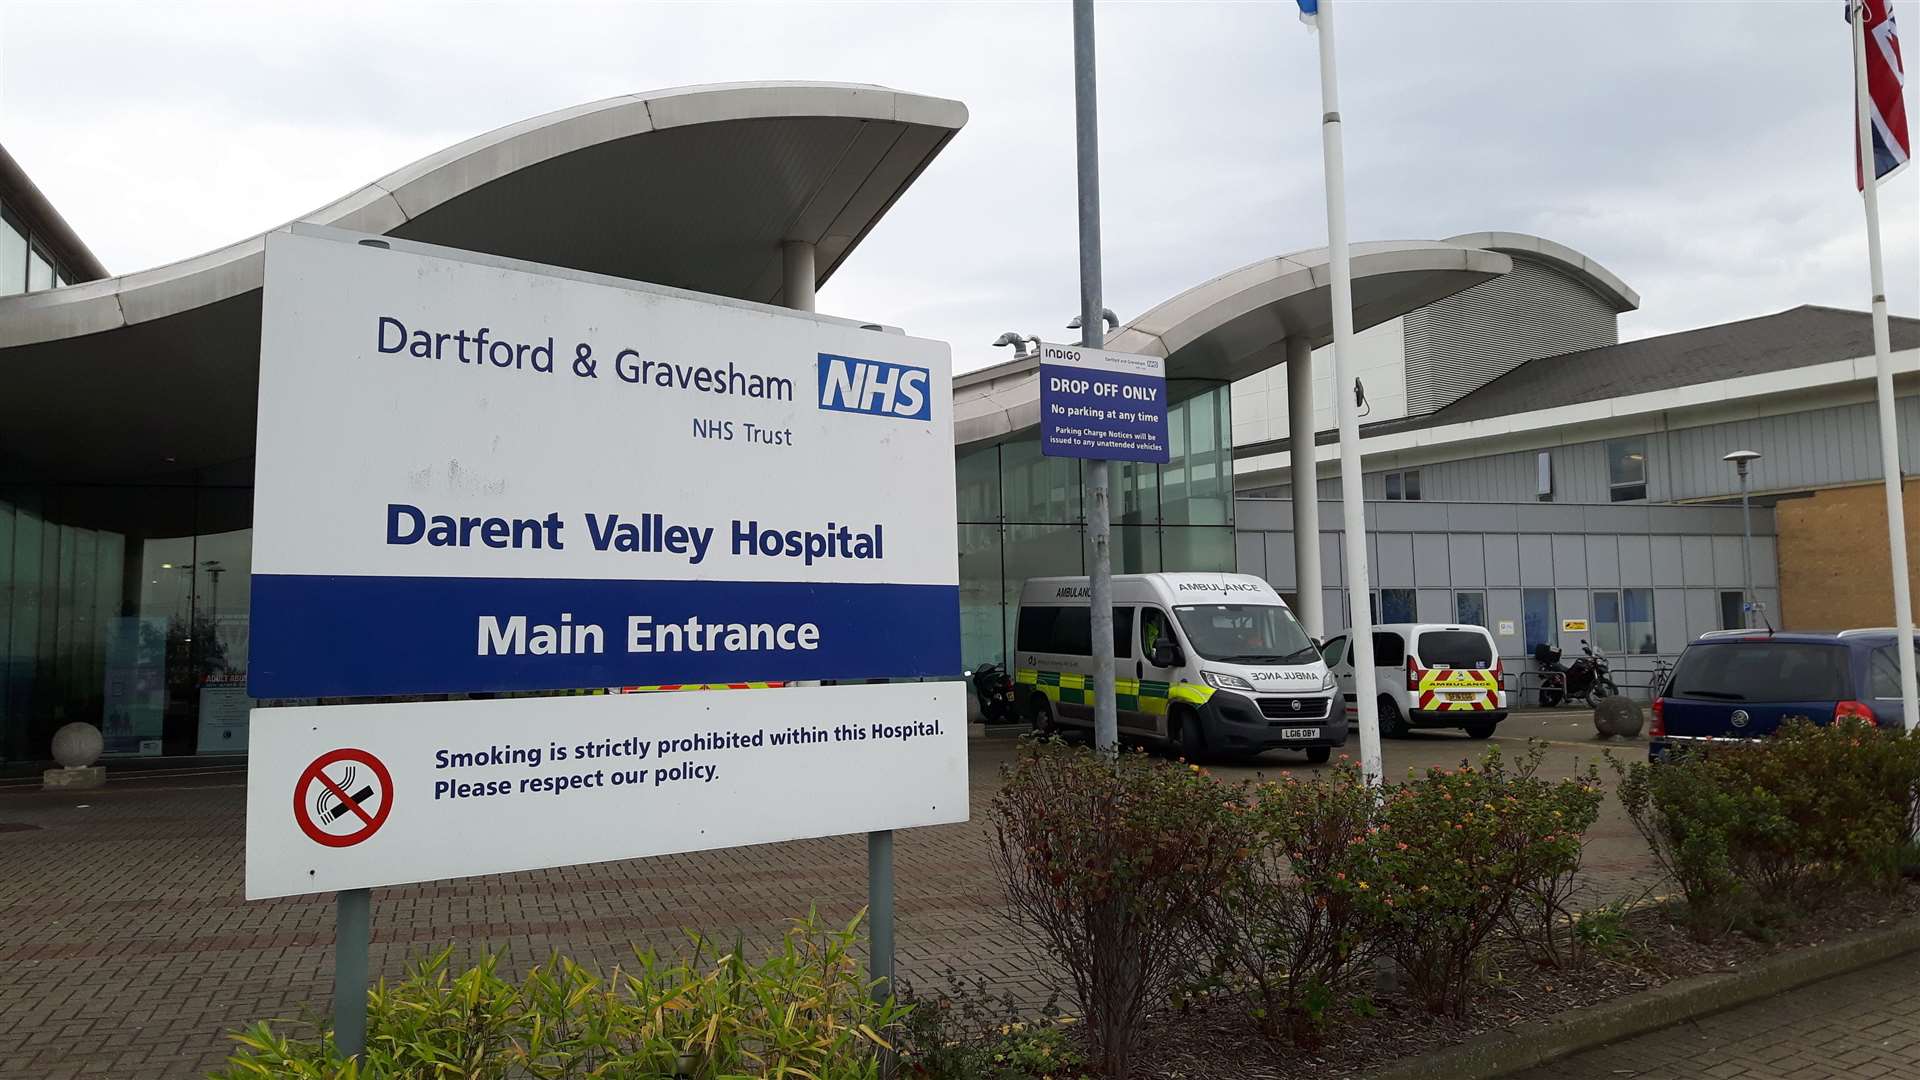 Darent Valley Hospital has seen a rise in the theft of catalytic converters from vehicles parked in the car park.